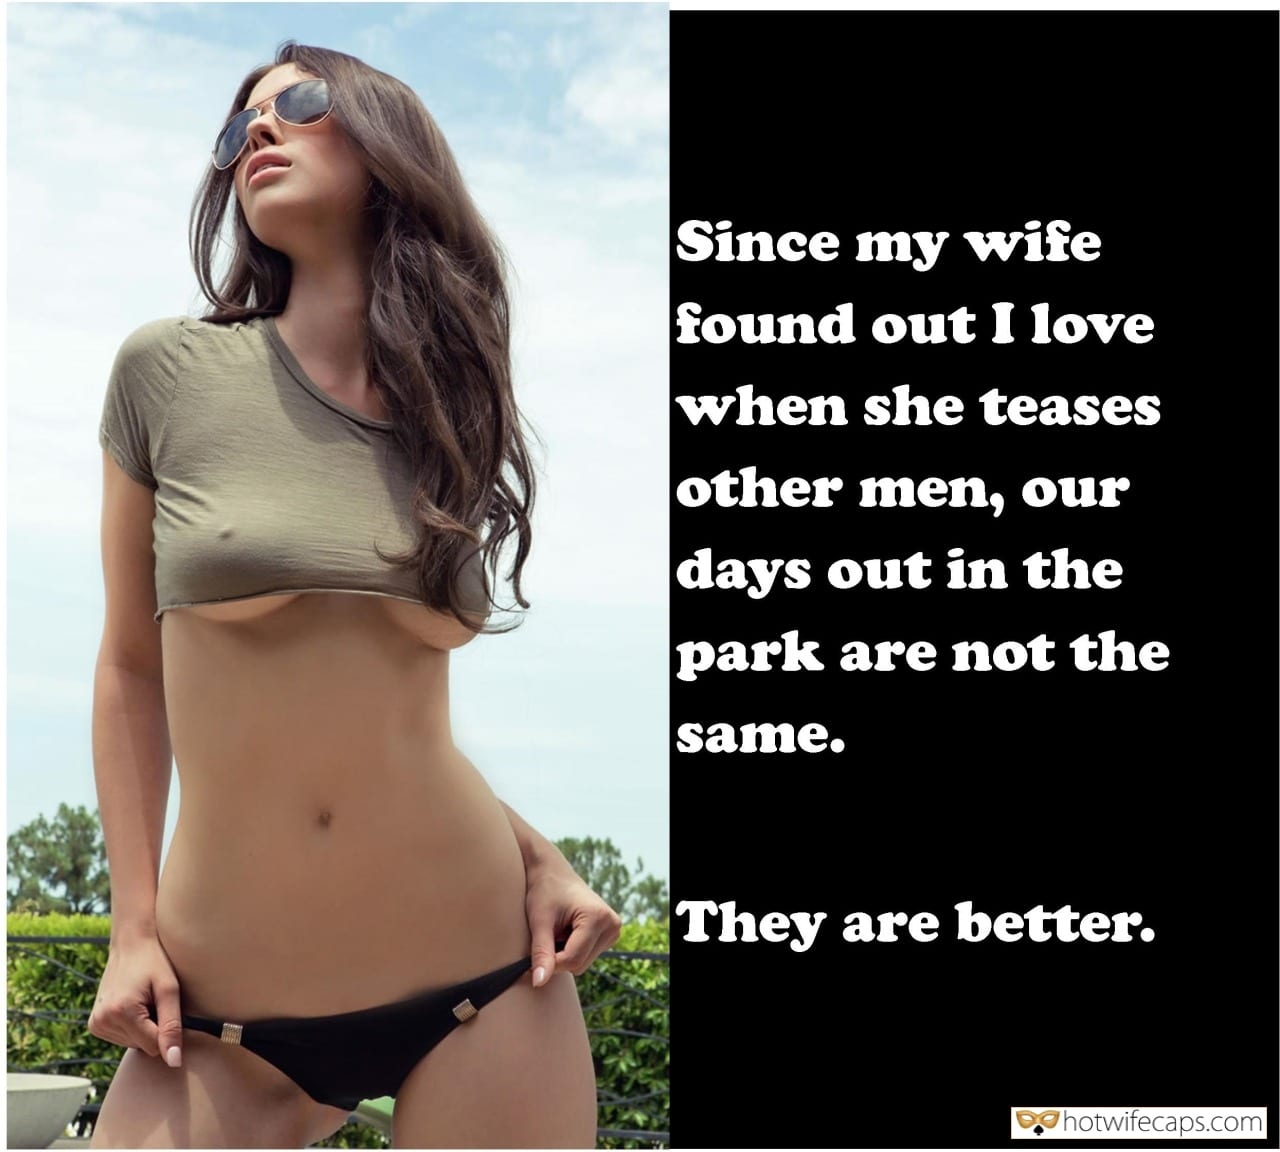 Flashing, Public, Sexy Memes, Vacation Hotwife Caption №14498 Sexy brunette wife underboobs and pokies picture pic